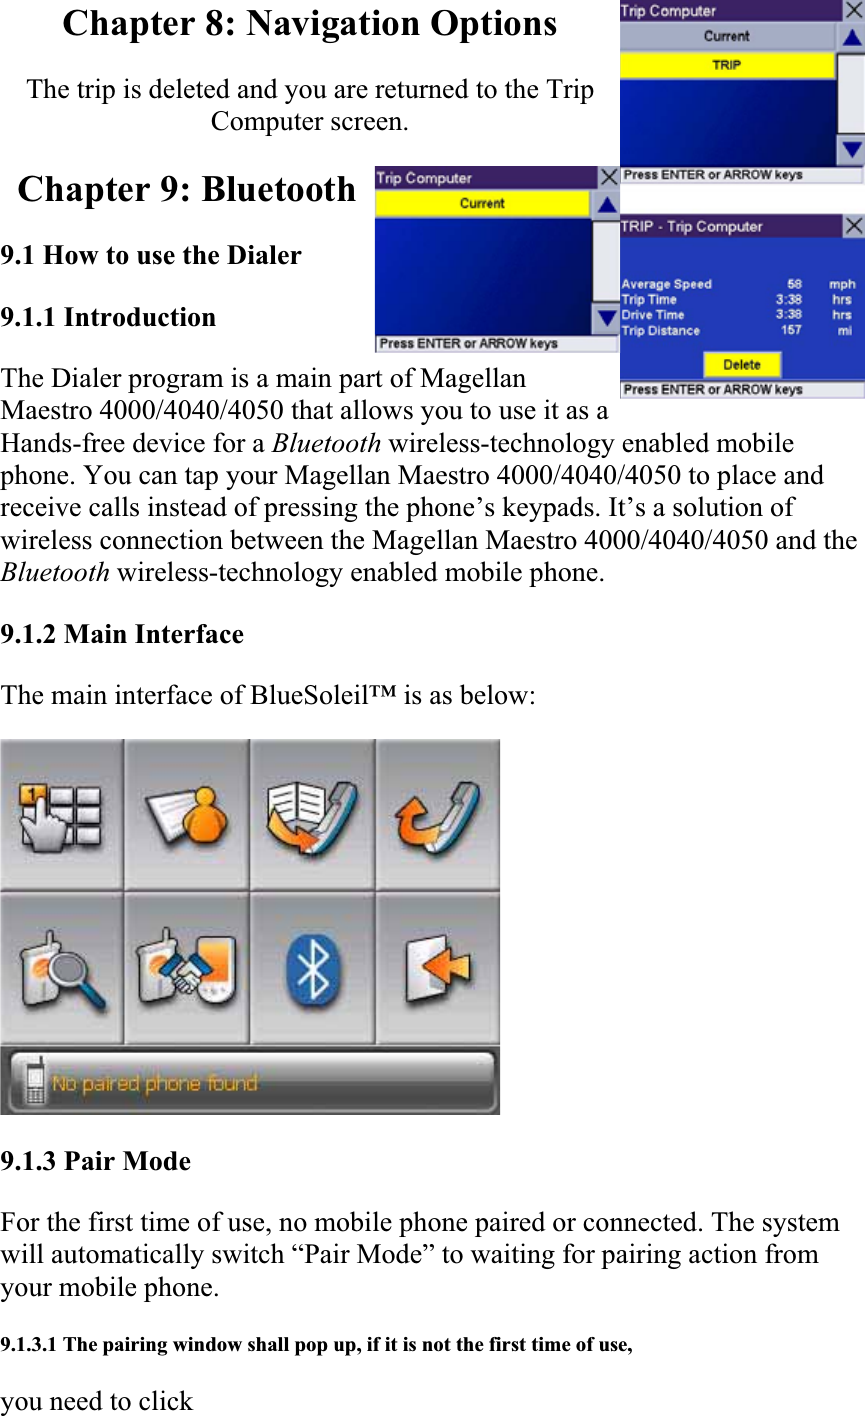 Chapter 8: Navigation Options The trip is deleted and you are returned to the Trip Computer screen.  Chapter 9: Bluetooth 9.1 How to use the Dialer9.1.1 Introduction  The Dialer program is a main part of Magellan Maestro 4000/4040/4050 that allows you to use it as a Hands-free device for a Bluetooth wireless-technology enabled mobile phone. You can tap your Magellan Maestro 4000/4040/4050 to place and receive calls instead of pressing the phone’s keypads. It’s a solution of wireless connection between the Magellan Maestro 4000/4040/4050 and theBluetooth wireless-technology enabled mobile phone.  9.1.2 Main Interface  The main interface of BlueSoleil™ is as below:  9.1.3 Pair Mode  For the first time of use, no mobile phone paired or connected. The system will automatically switch “Pair Mode” to waiting for pairing action from your mobile phone.  9.1.3.1 The pairing window shall pop up, if it is not the first time of use,  you need to click  